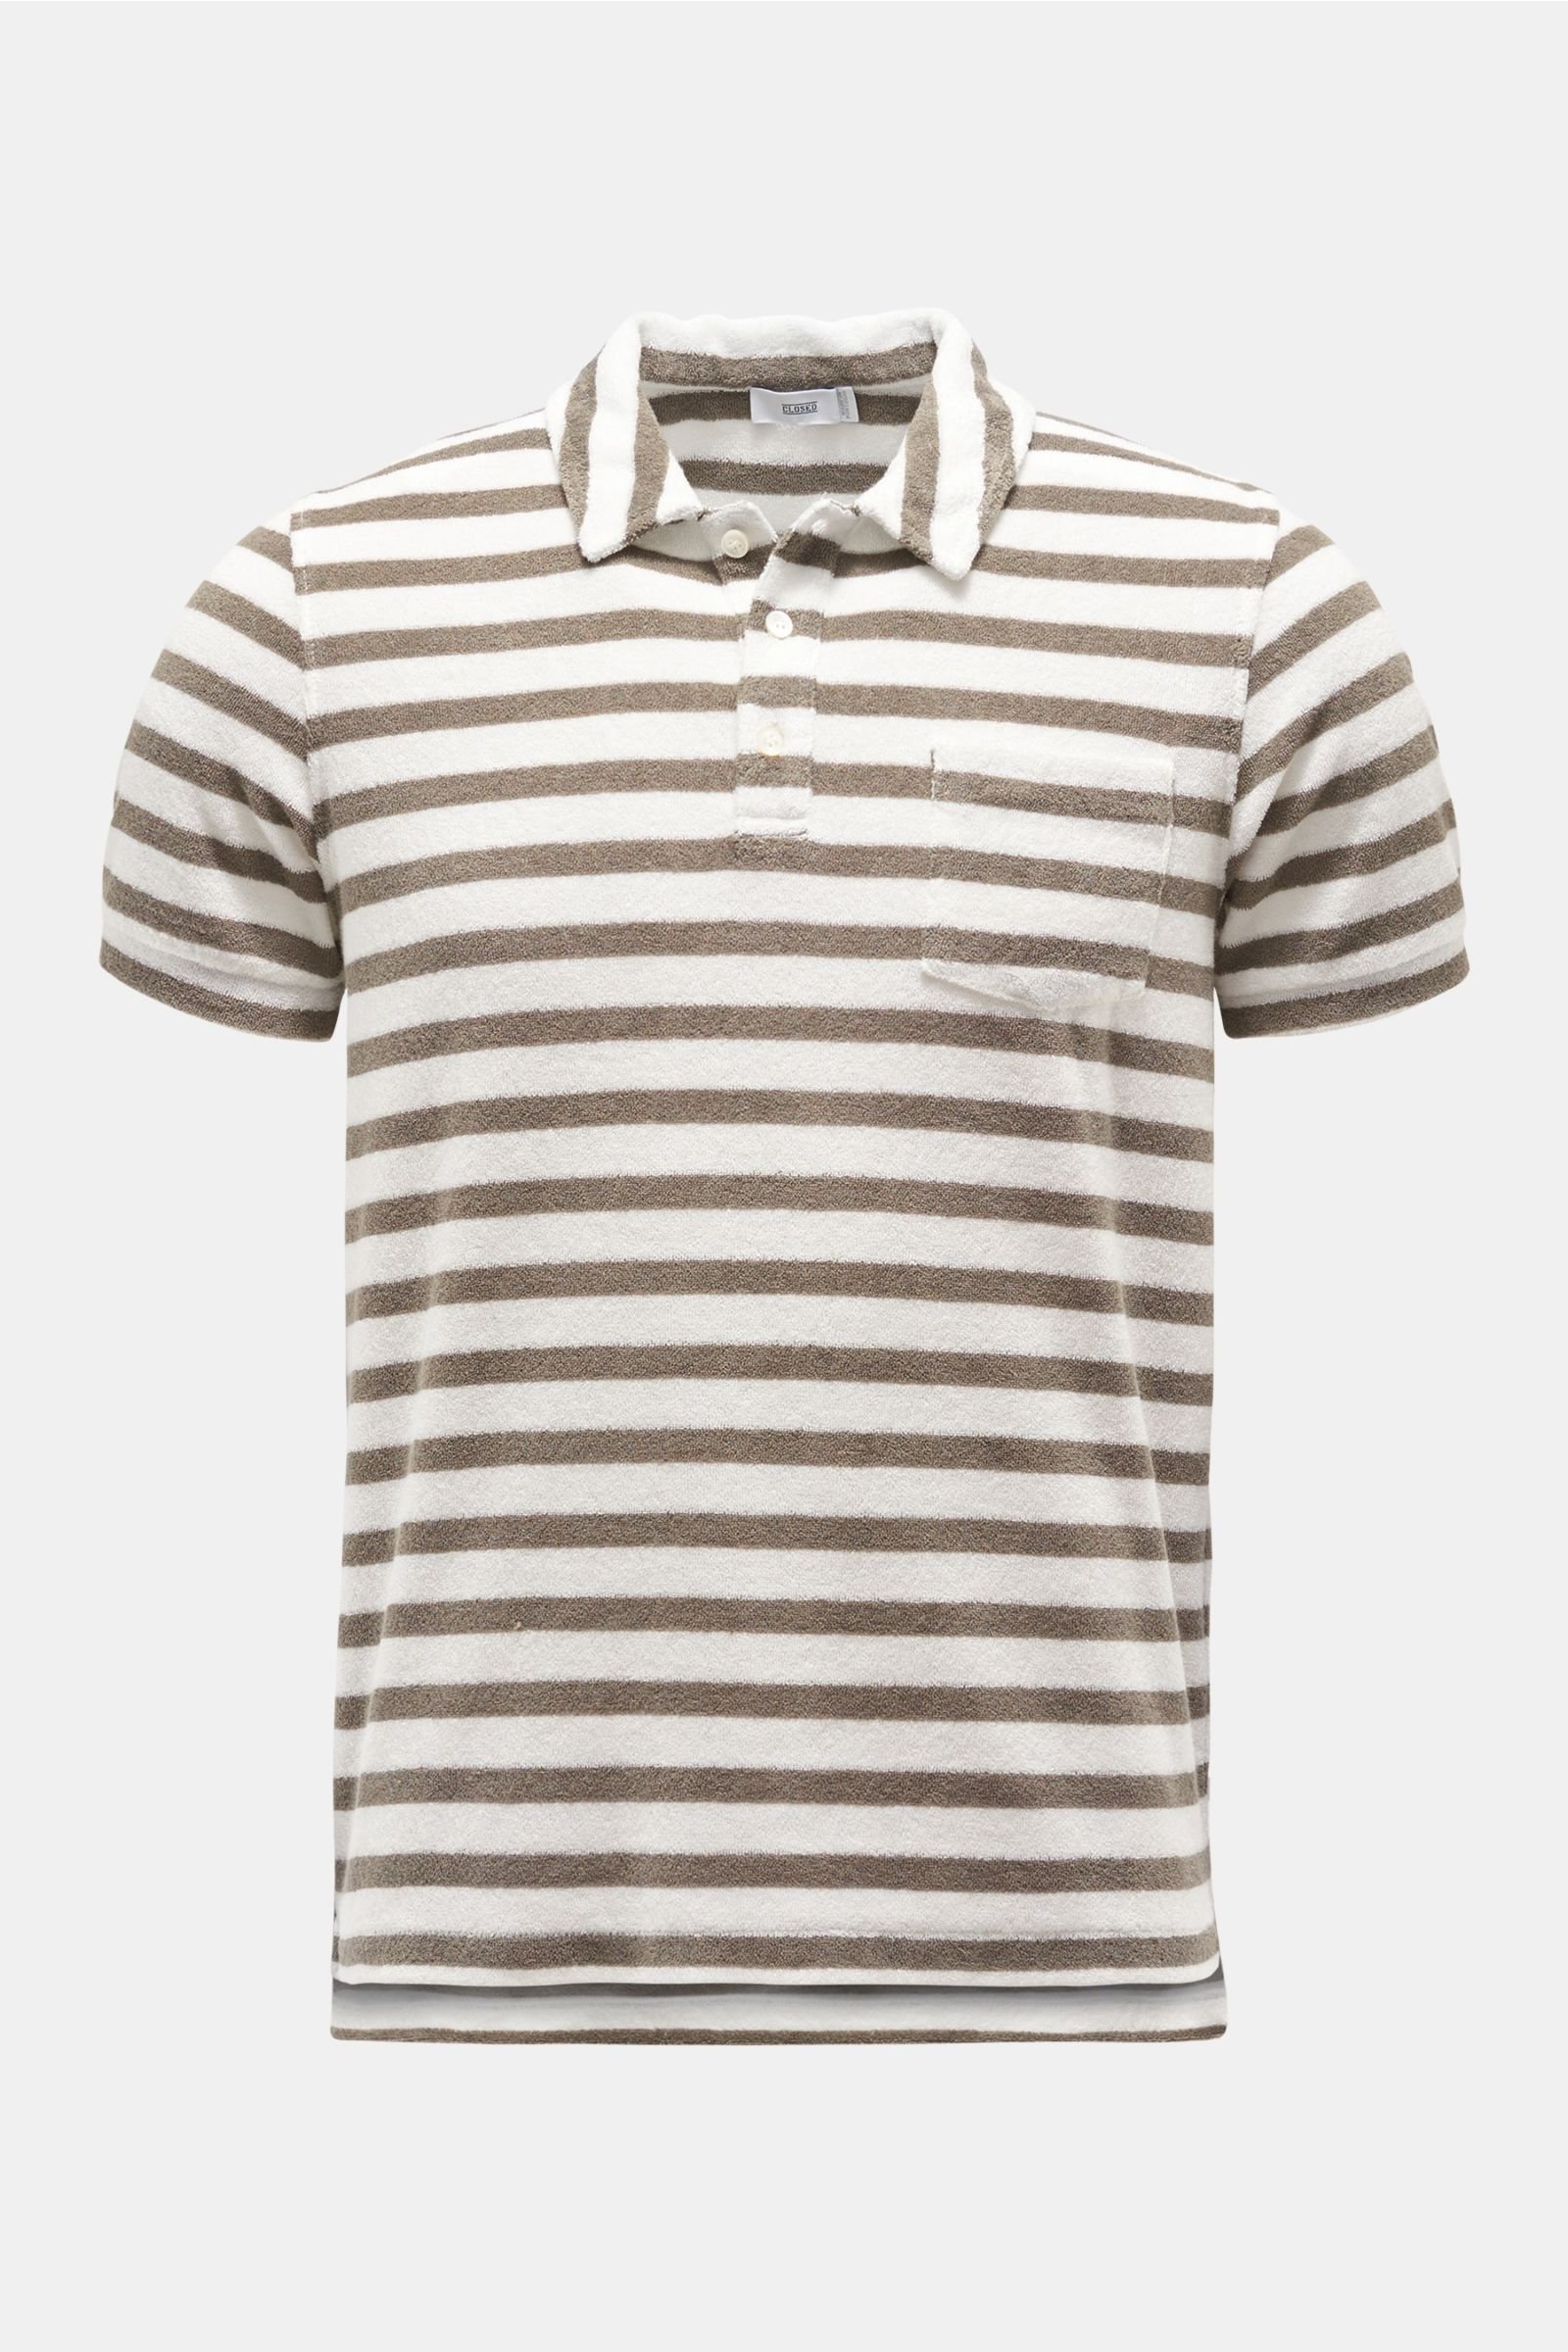 Terry polo shirt olive/white striped